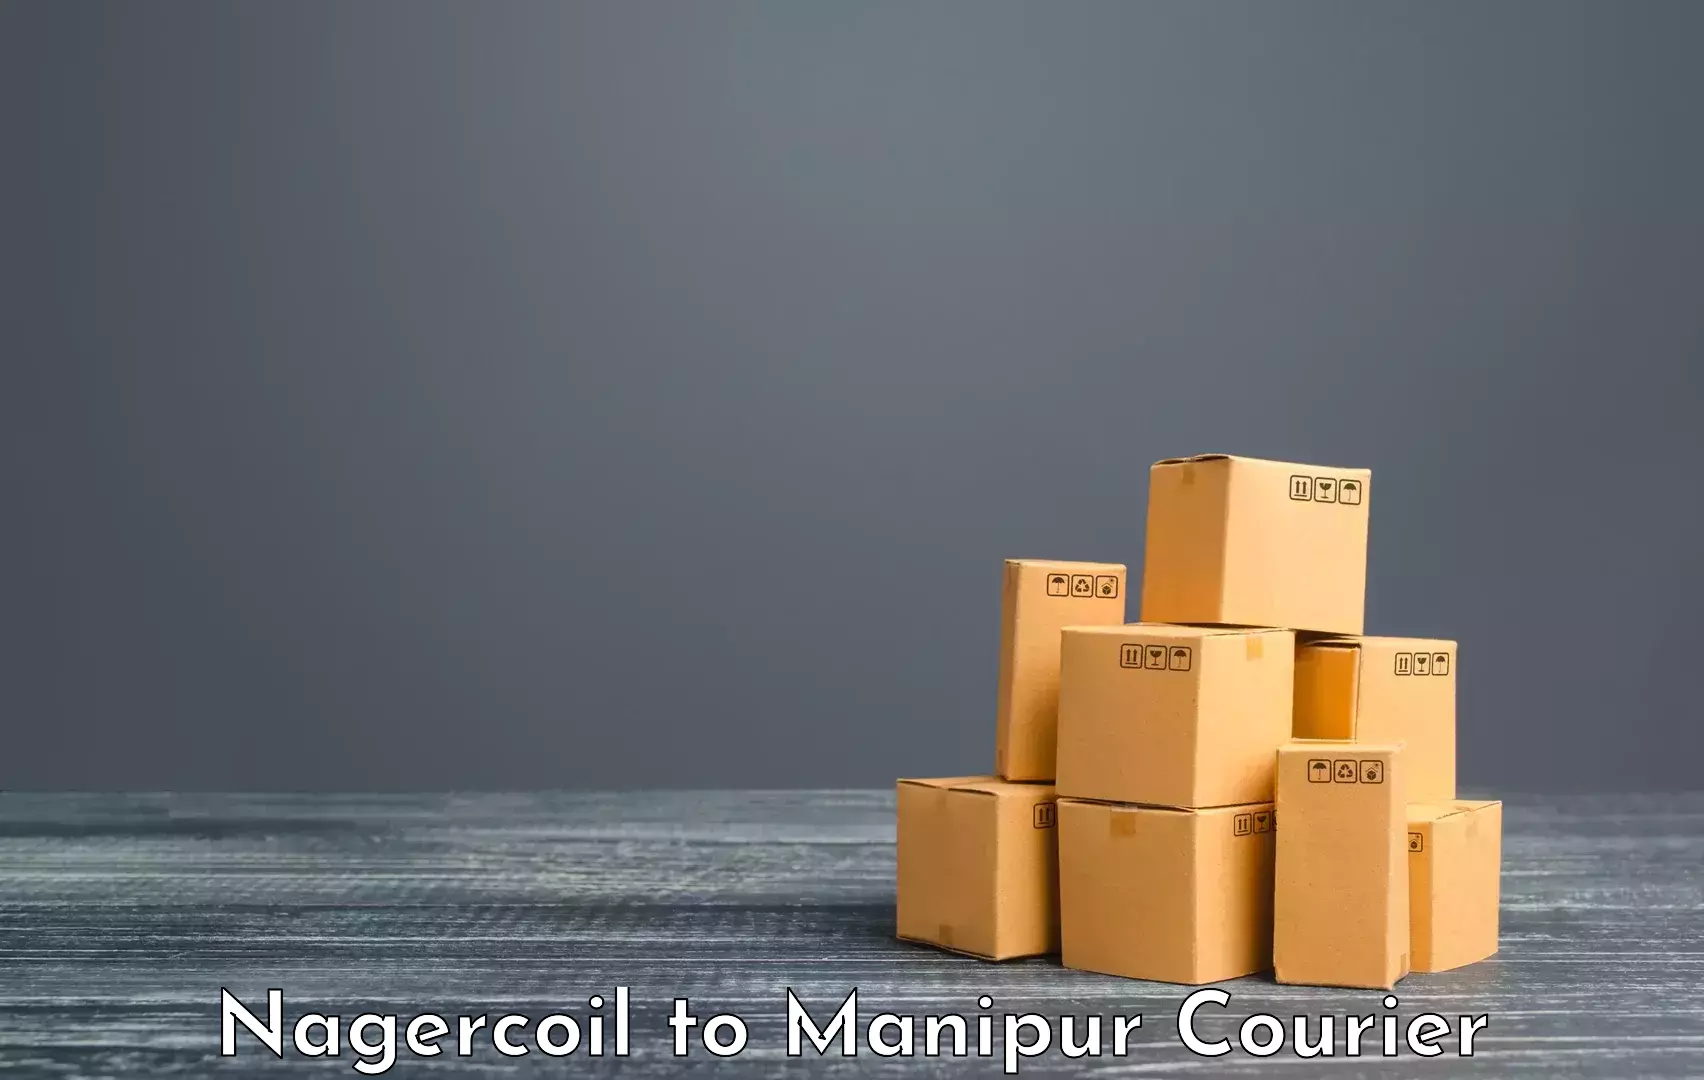 Luggage shipment specialists Nagercoil to Manipur